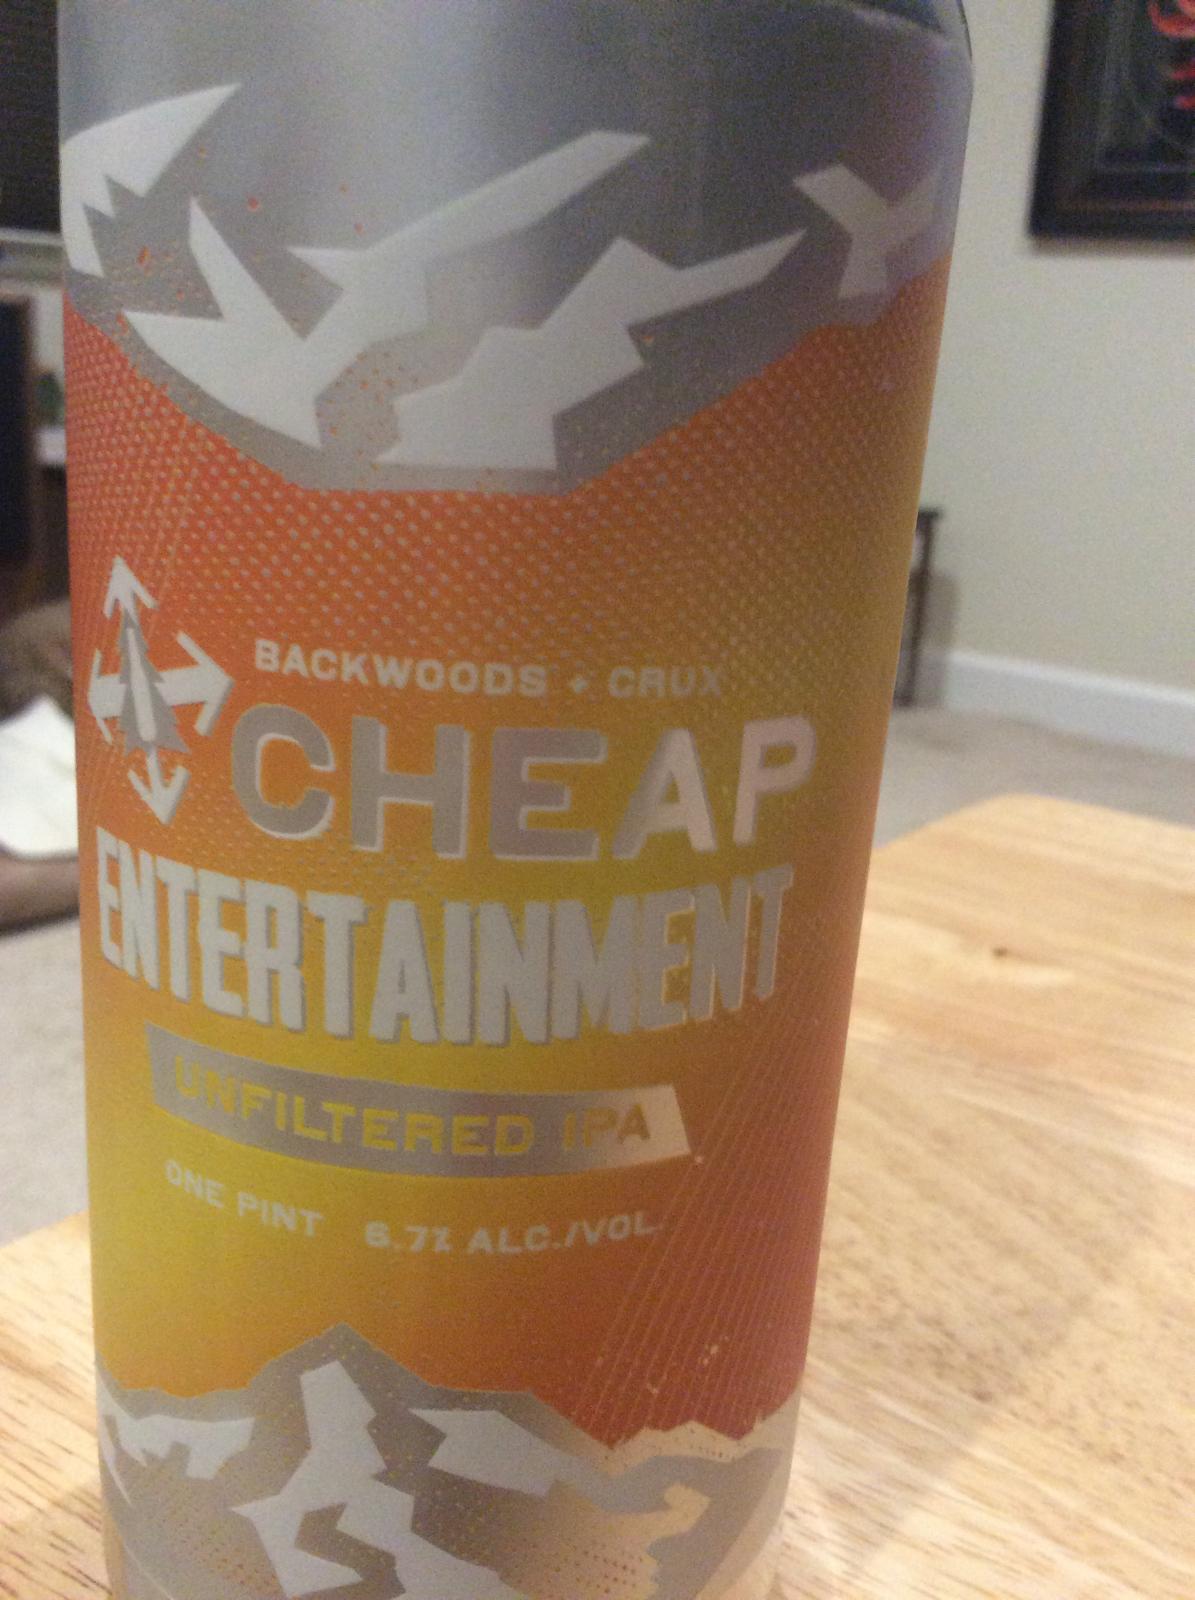 Cheap Entertainment (Collaboration with Backwoods)